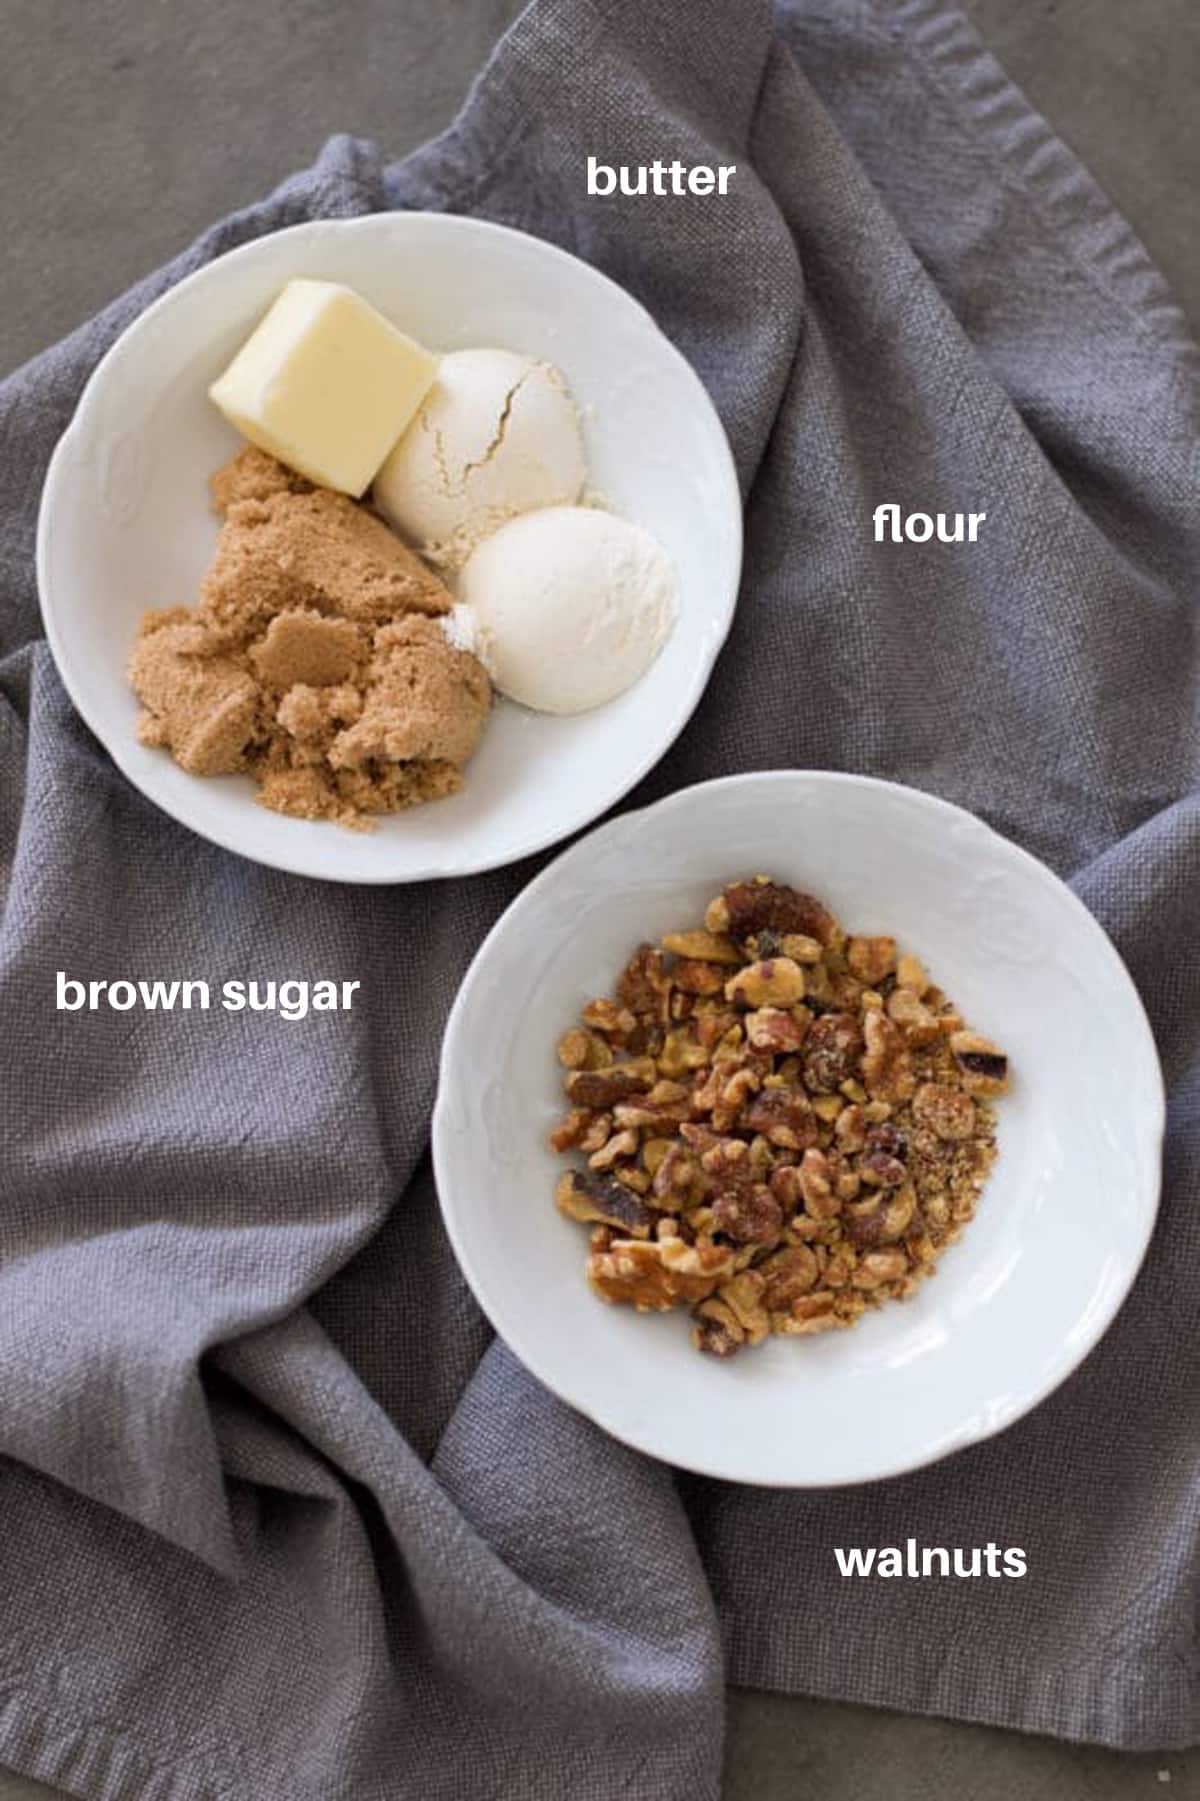 Ingredients to make a Streusel-Nut Topping, brown sugar, flour, butter and walnuts.